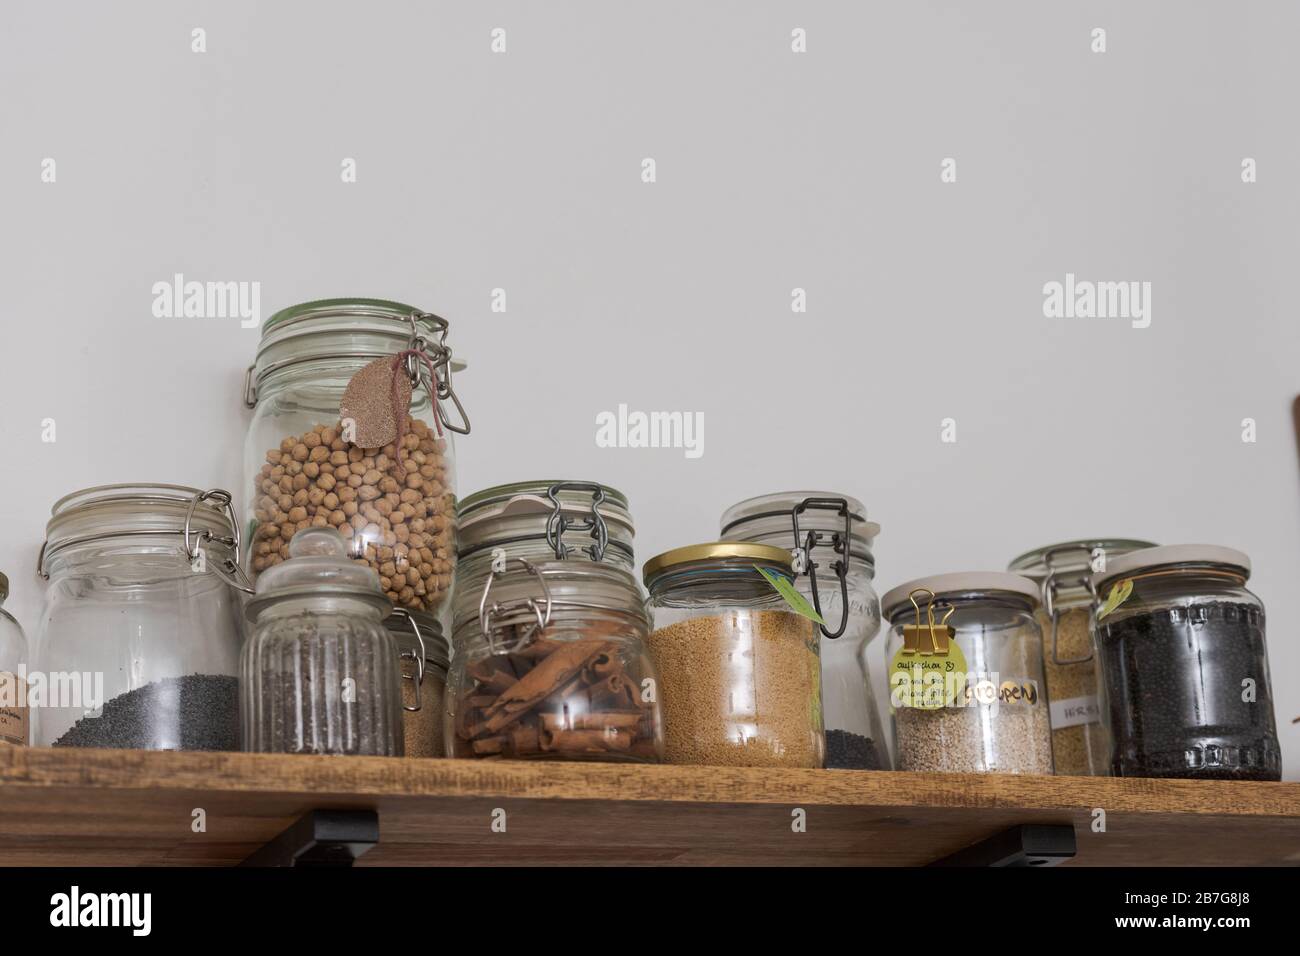 Low angle view of glass jars filled with various food supplies standing on wooden board in kitchen Stock Photo